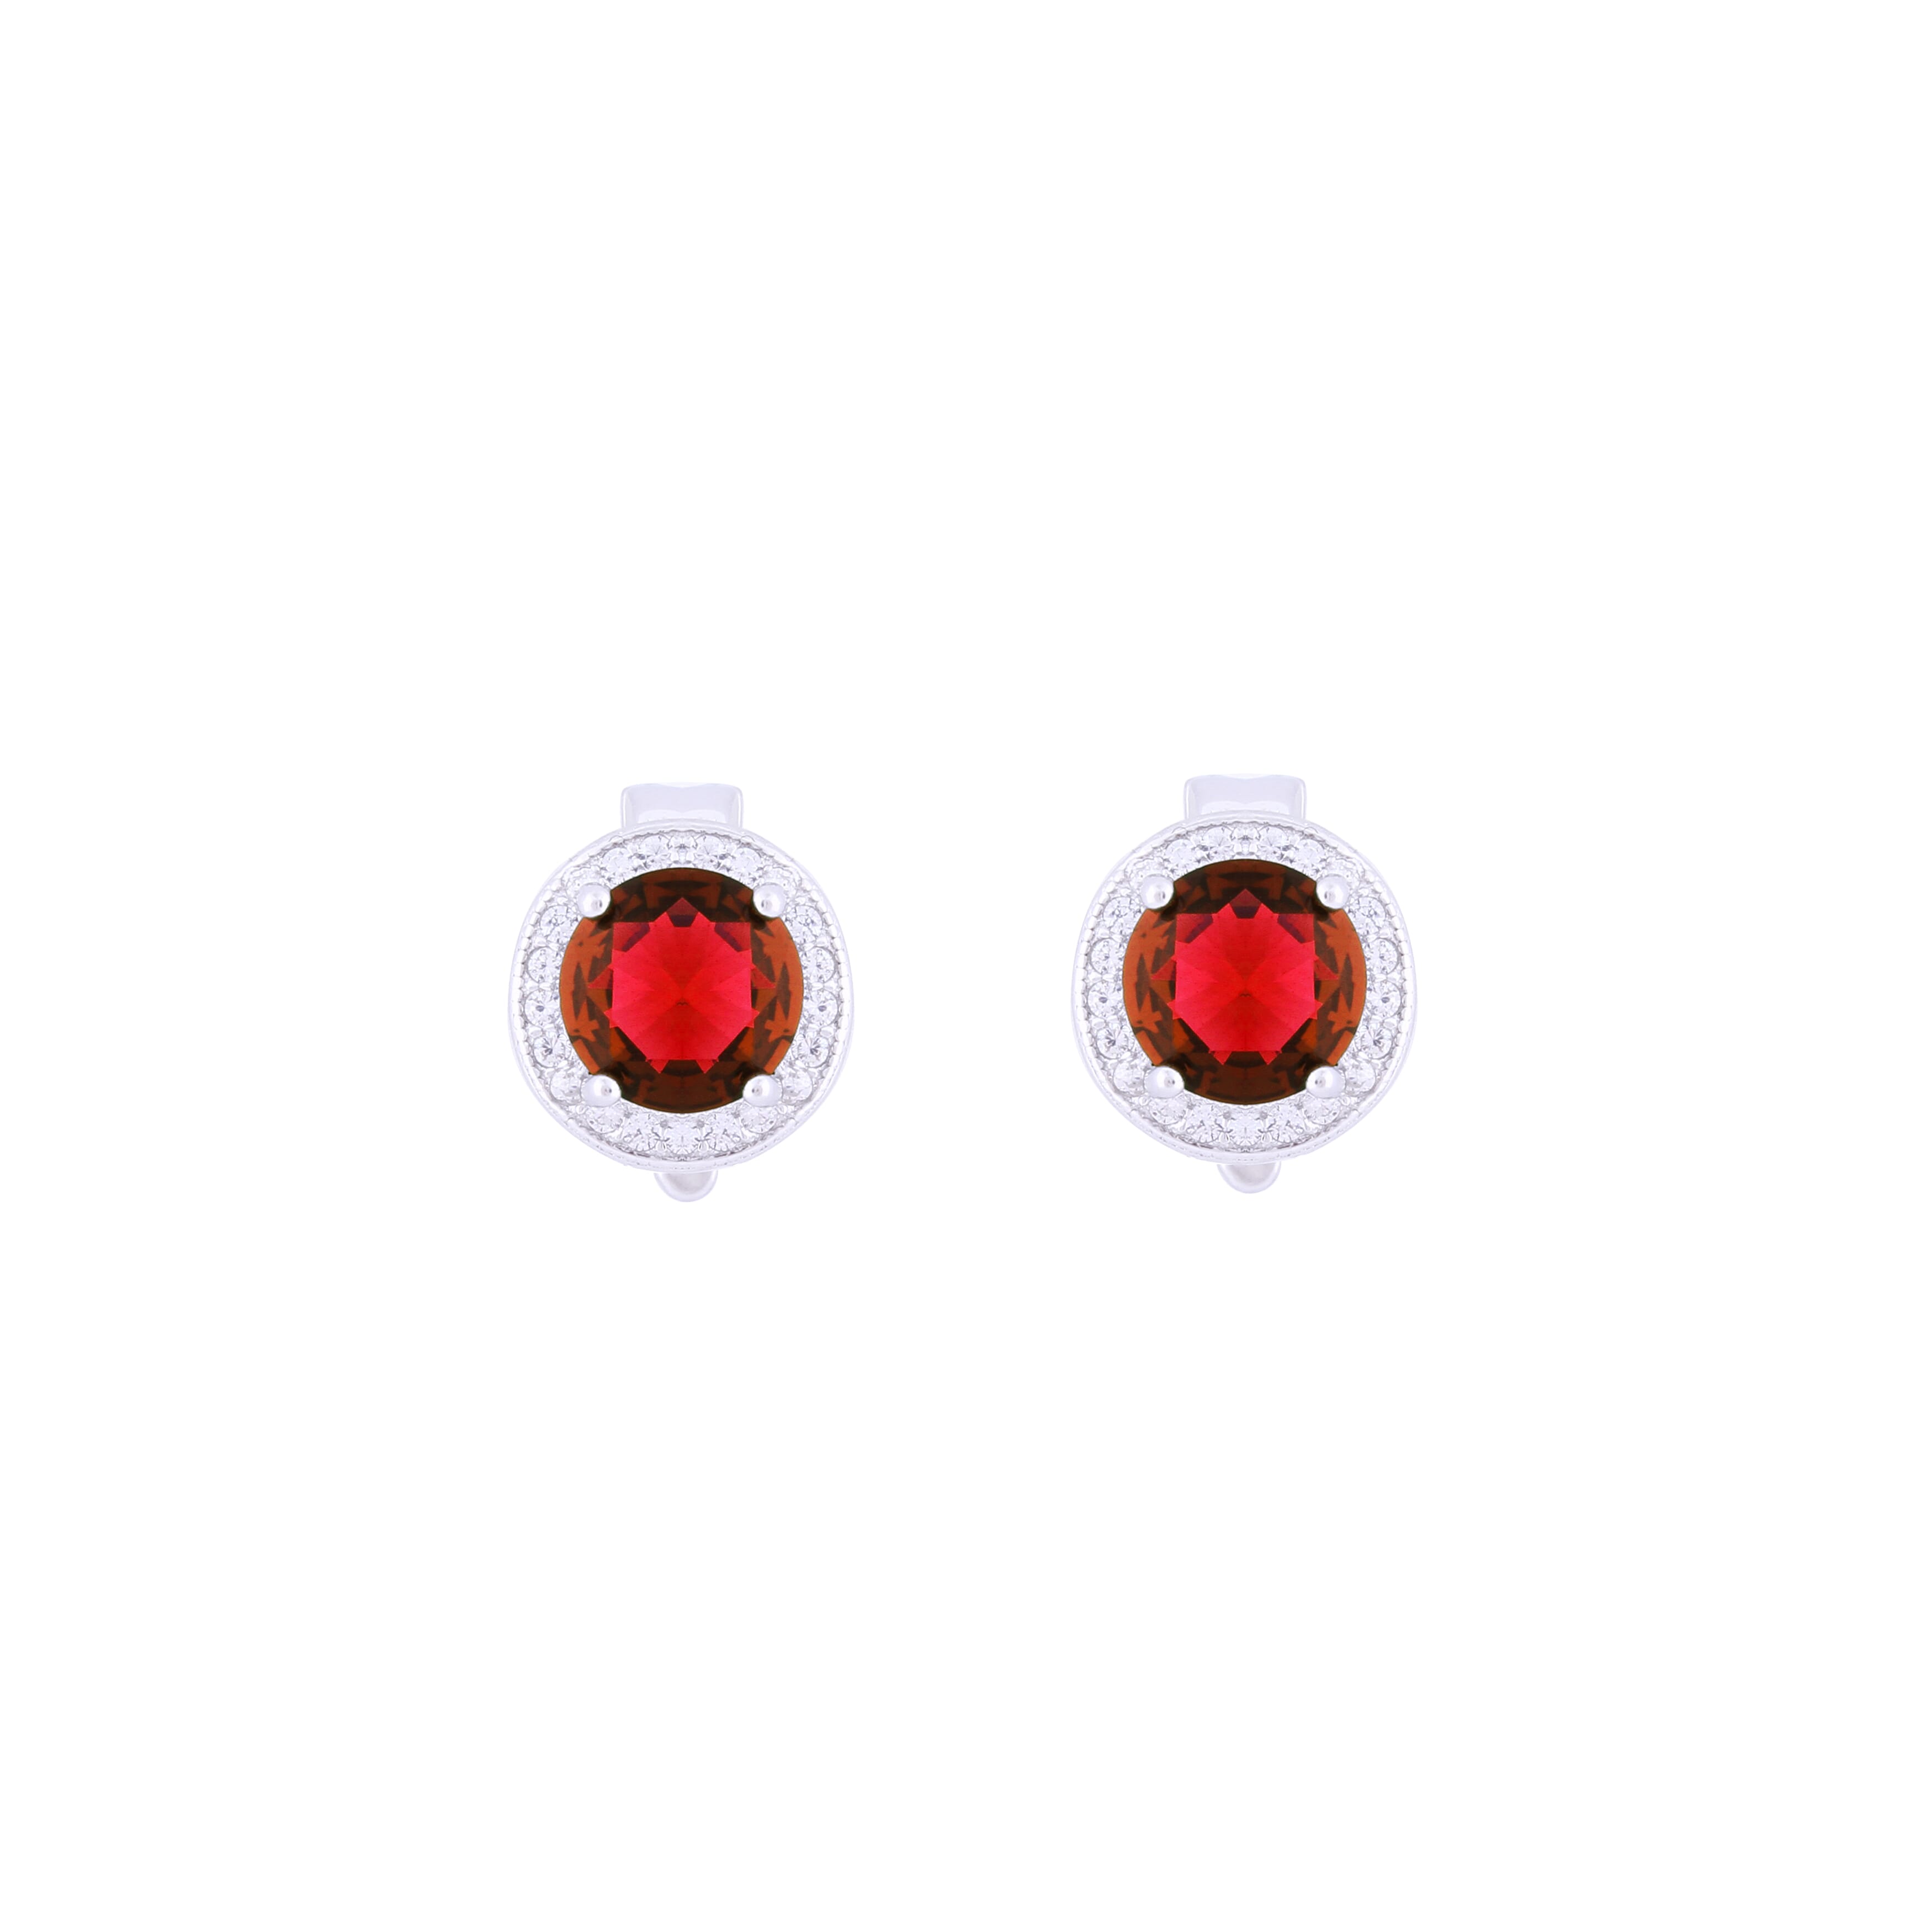 Asfour Crystal 925 Sterling Silver Clips Earrings with Red Round Stones